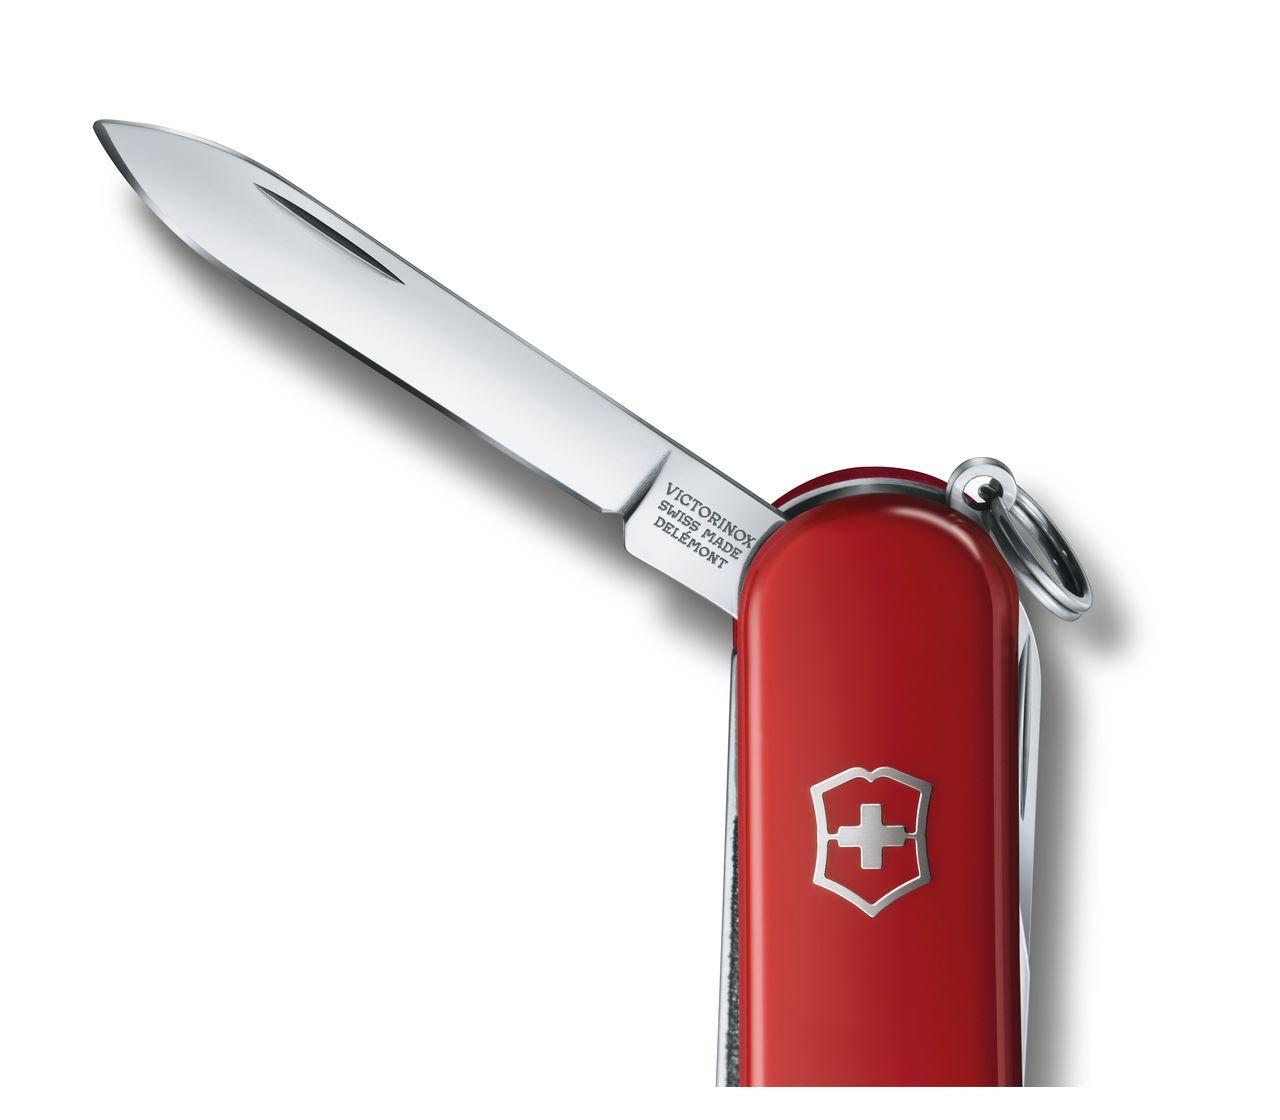 Victorinox 1340500 Compact Swiss Army Knife, Red